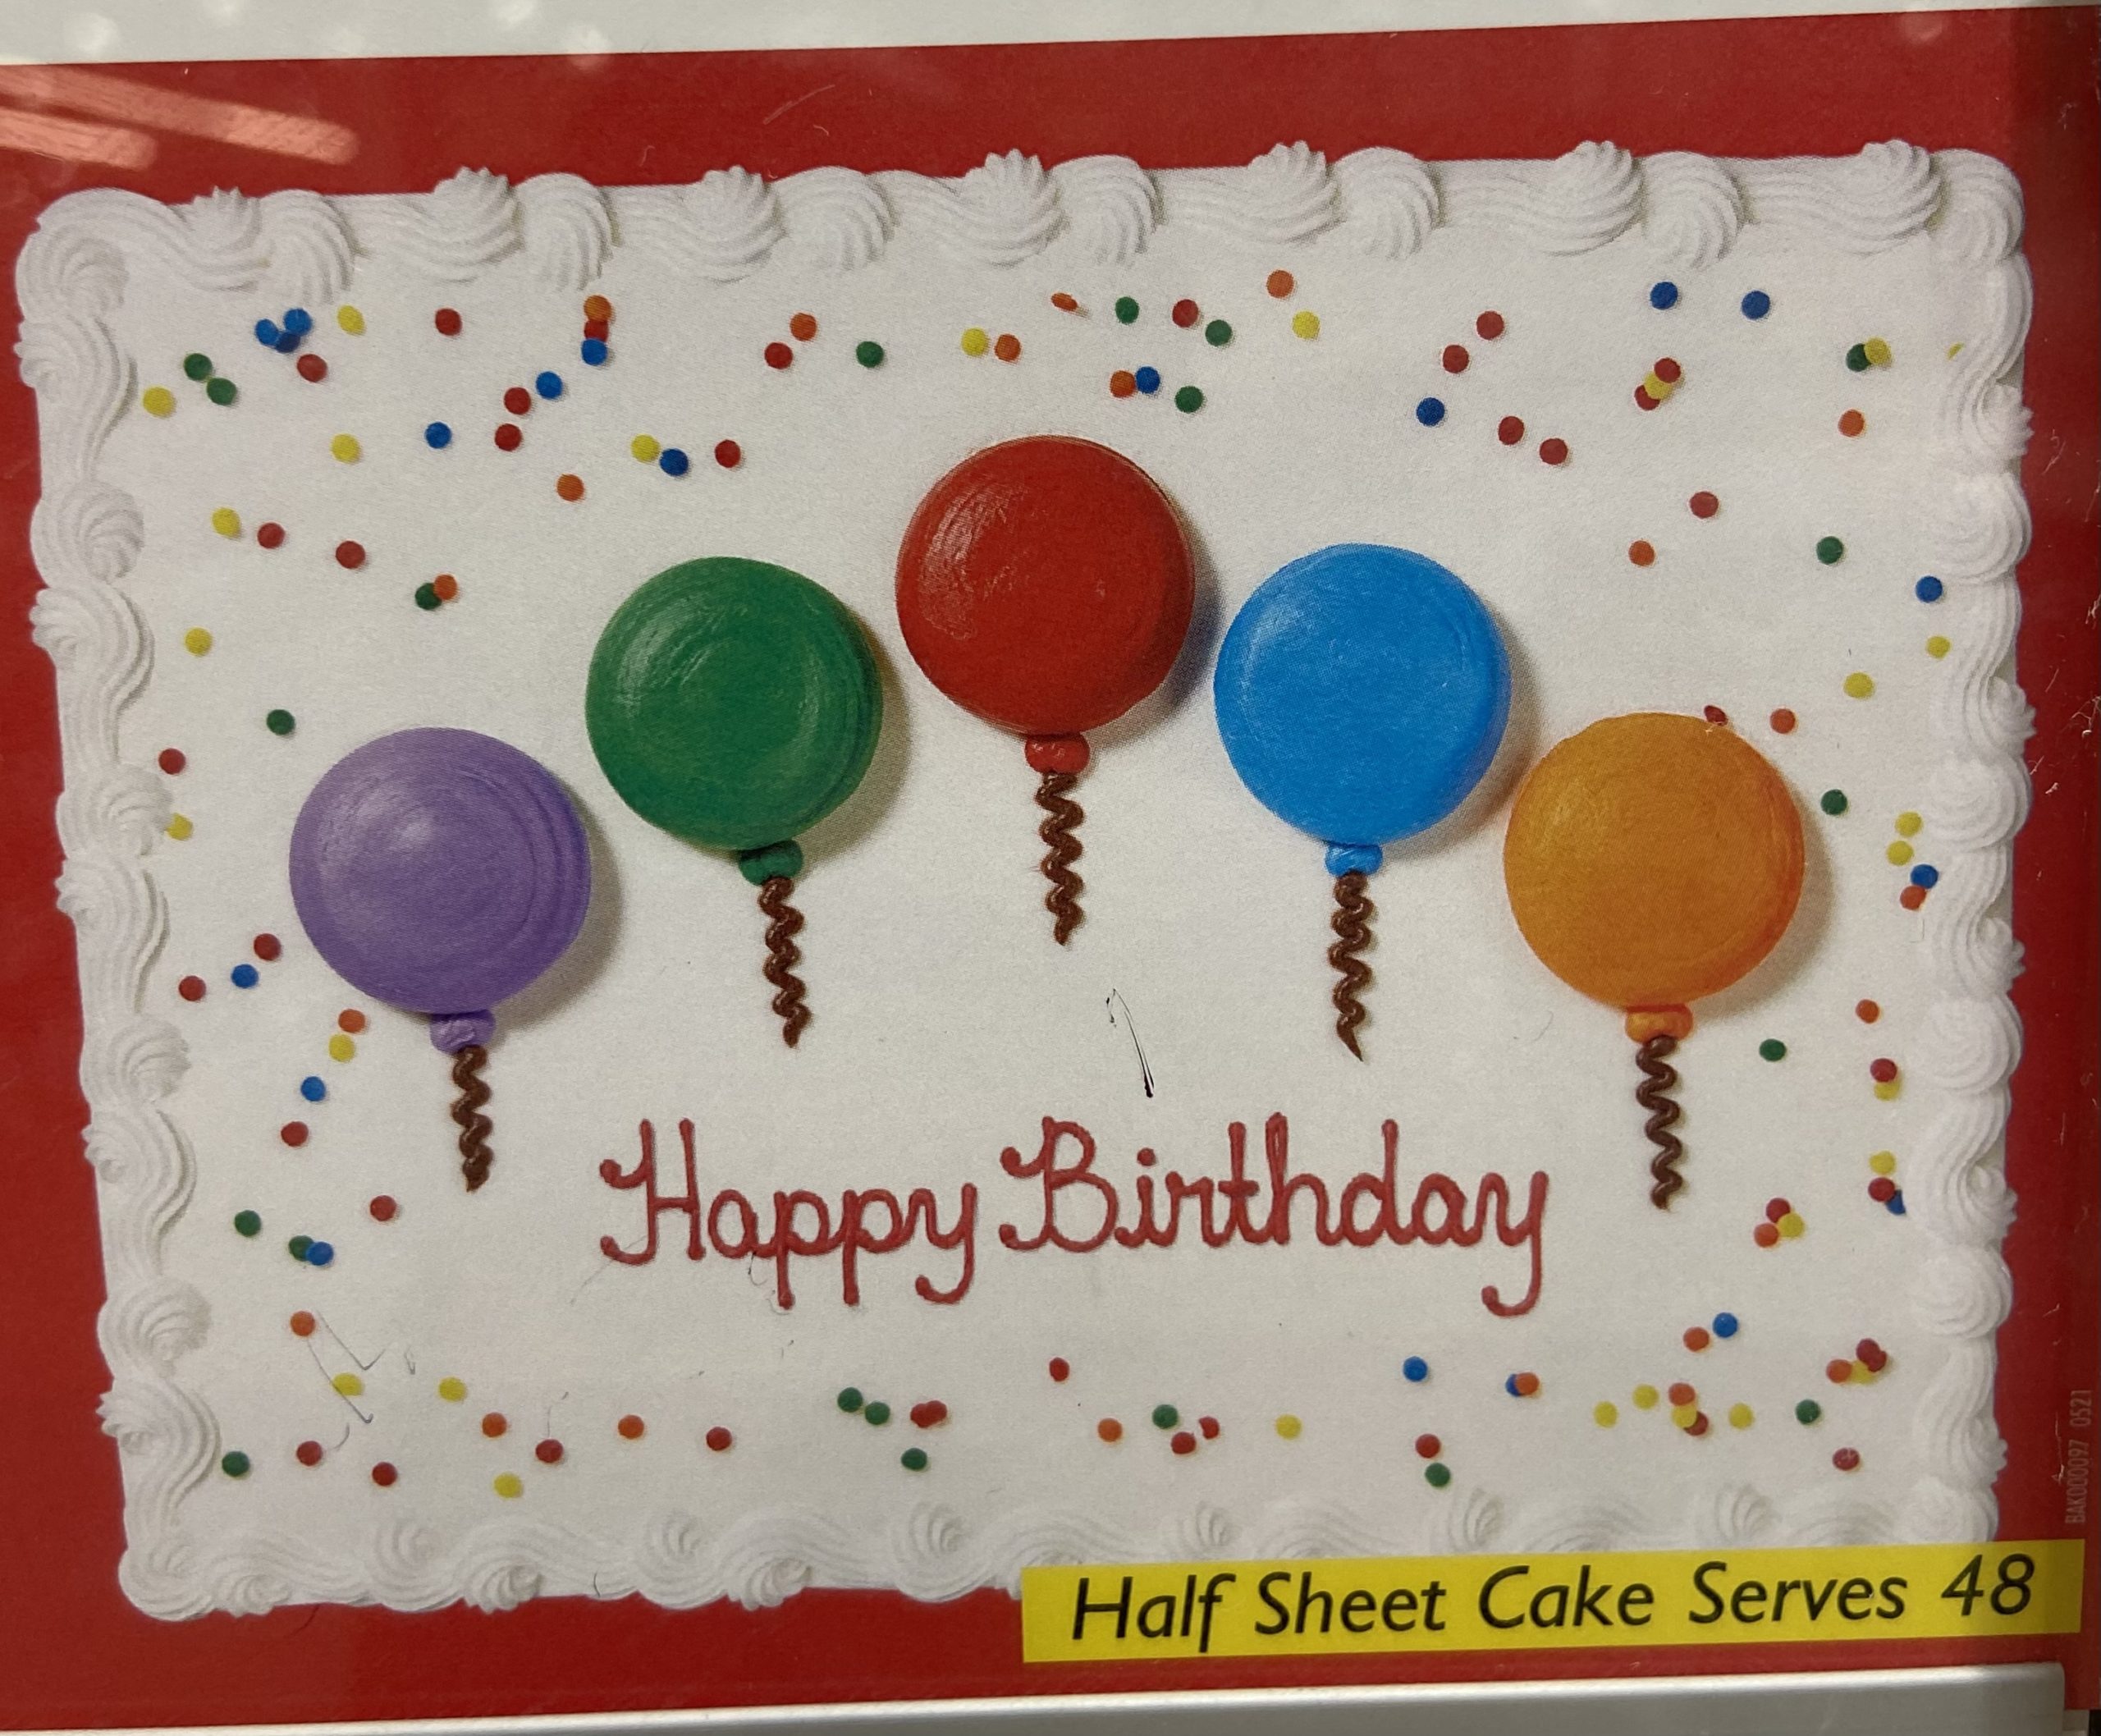 How To Order Cakes At Costco? - AisleofShame.com